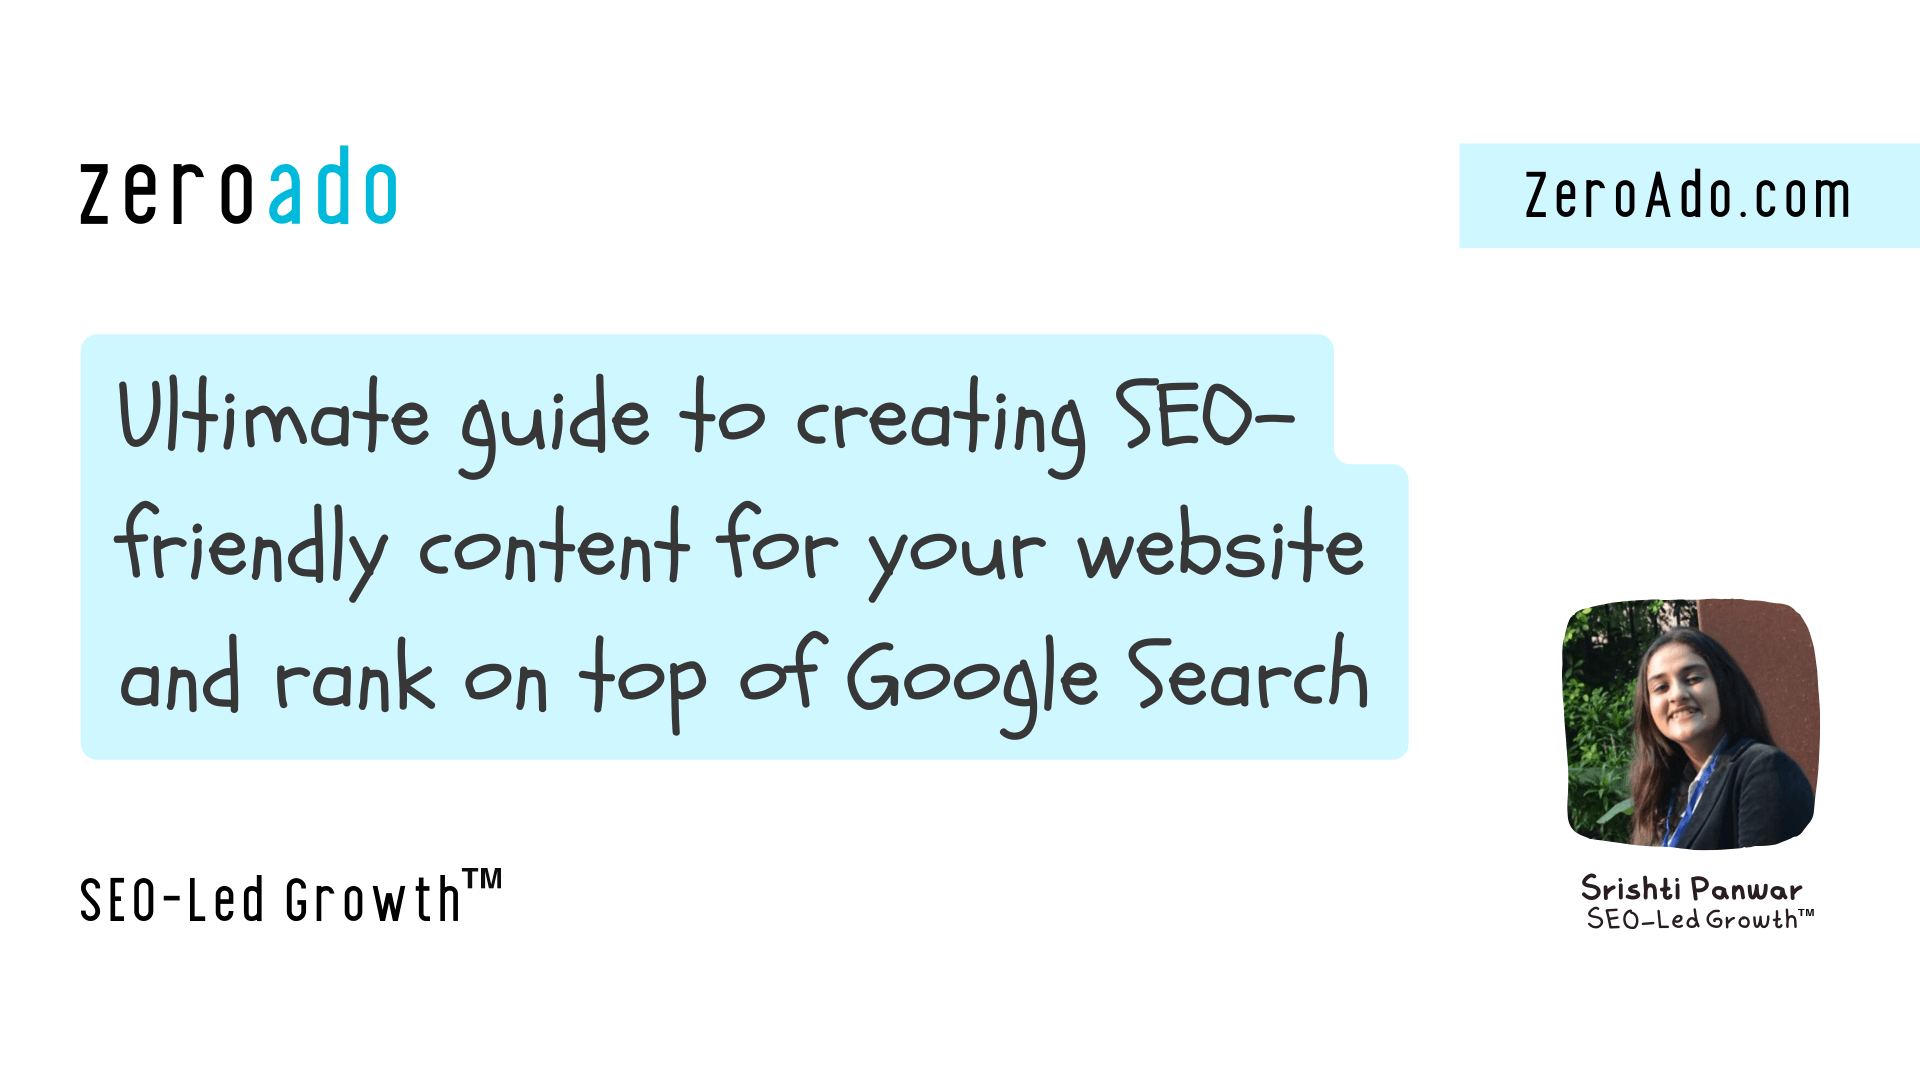 Learn to create SEO content step-by-step with this guide.